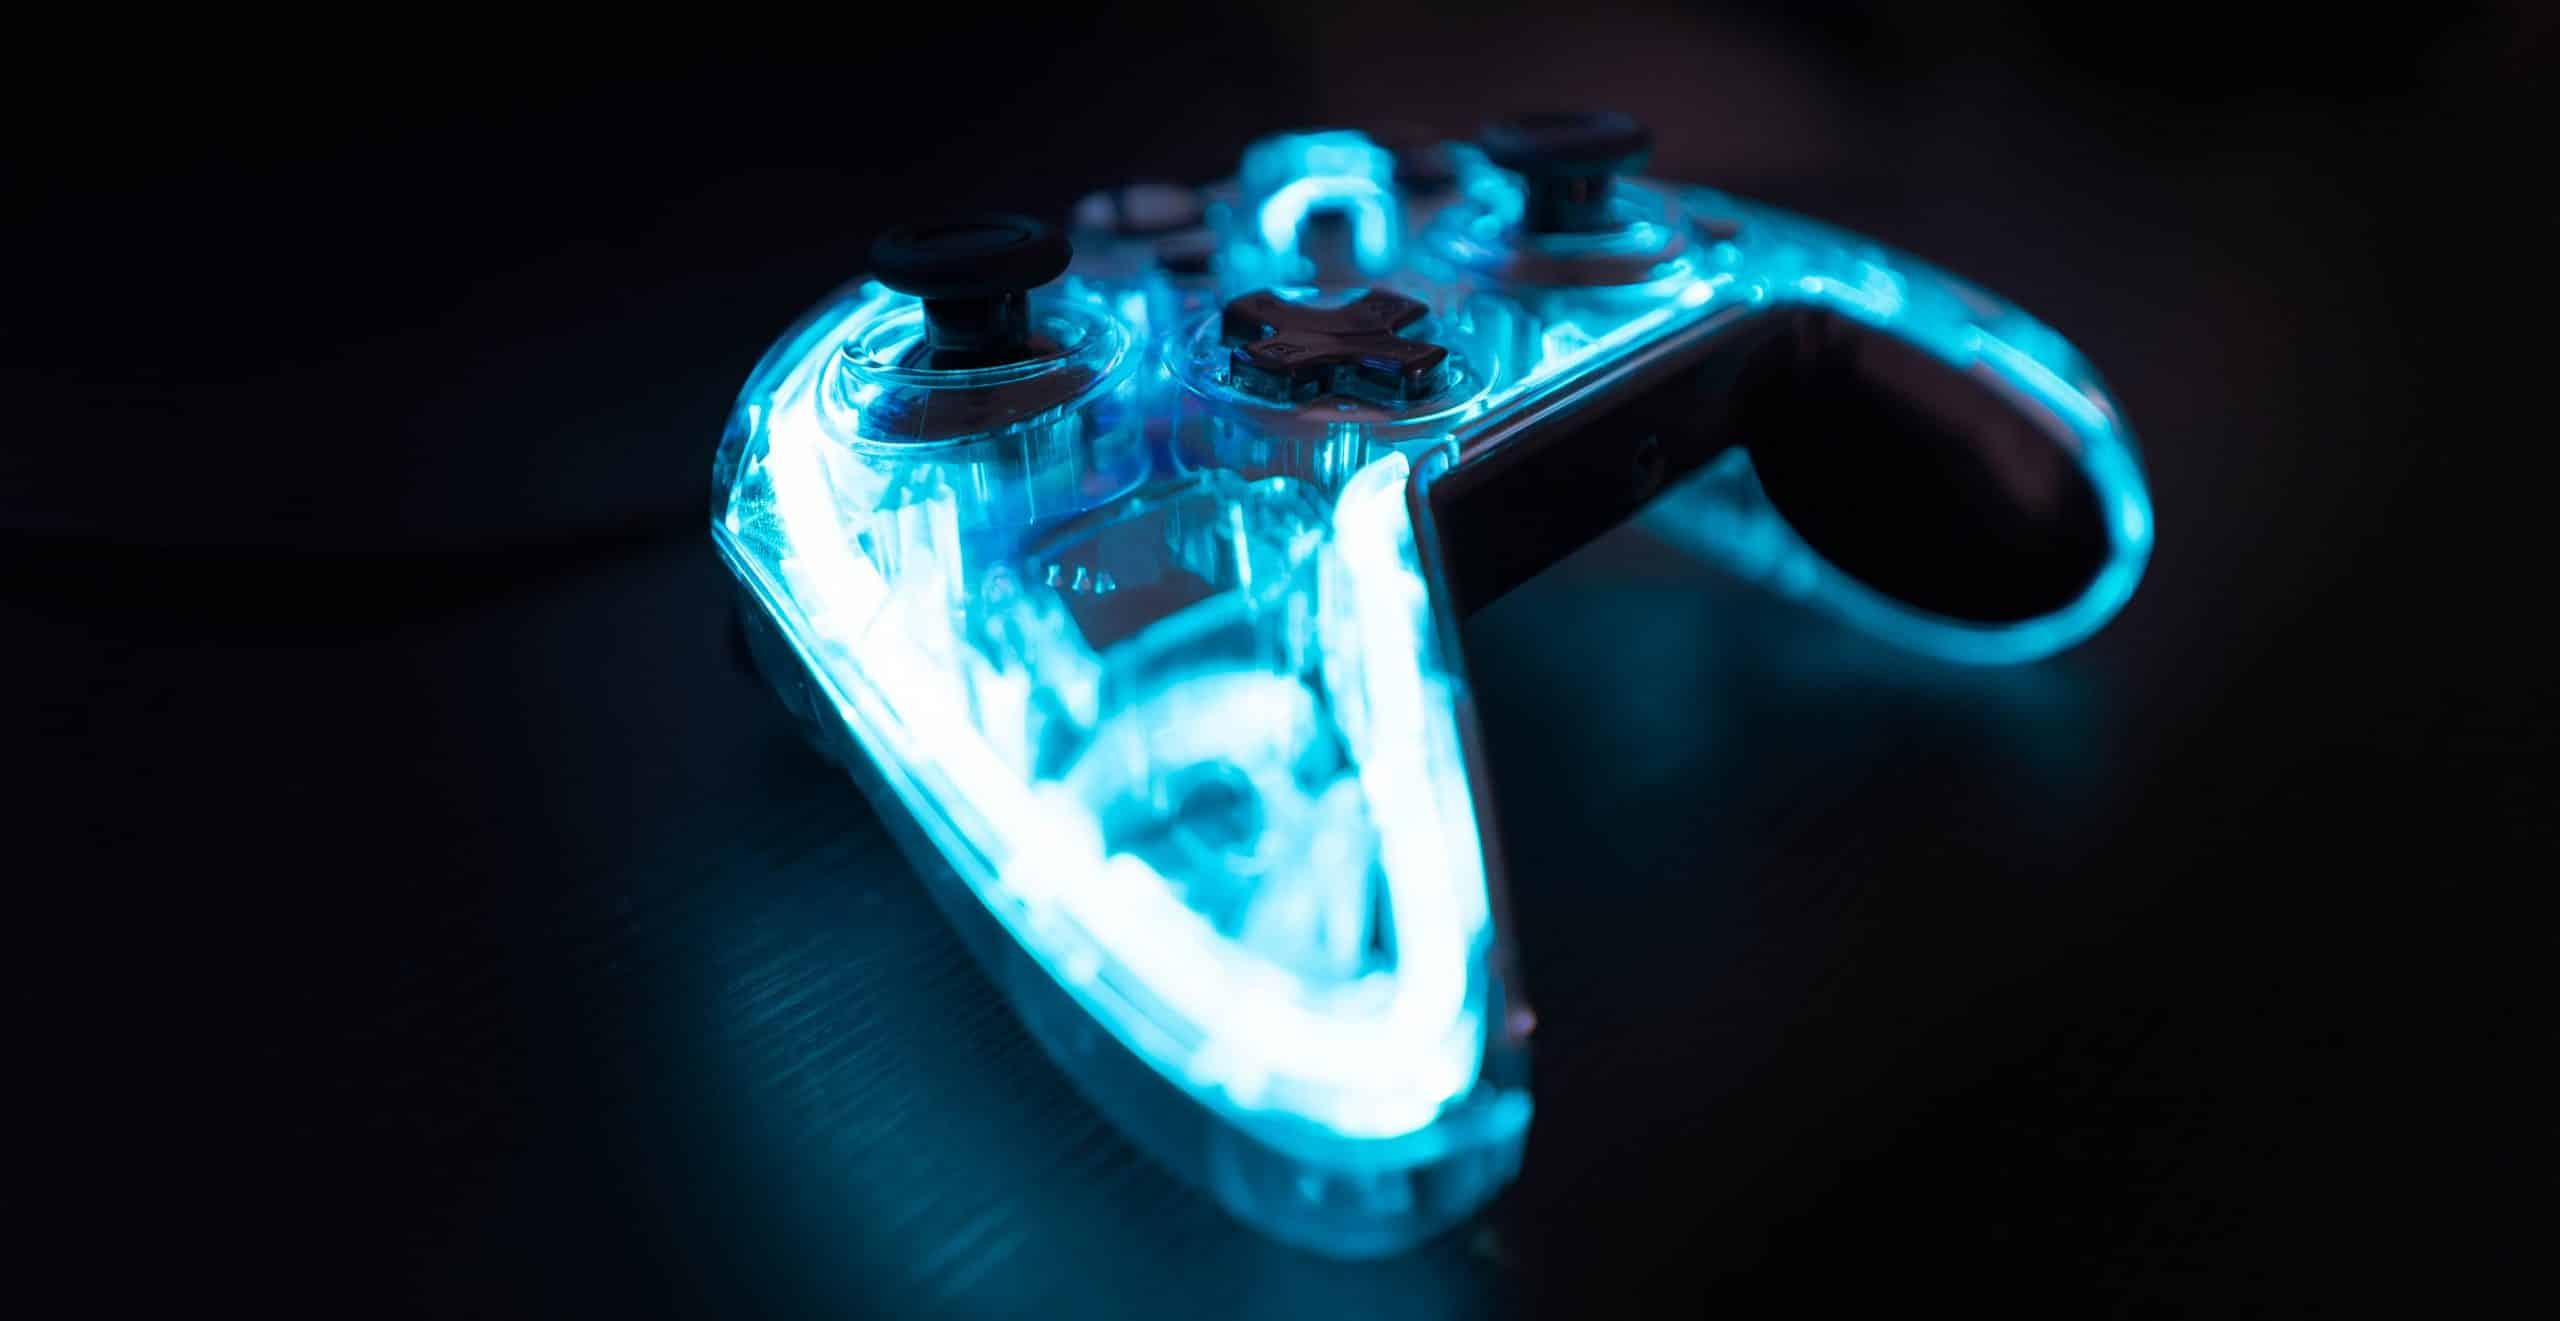 LED lighting can enhance your L-shaped gaming desk to infinity and beyond